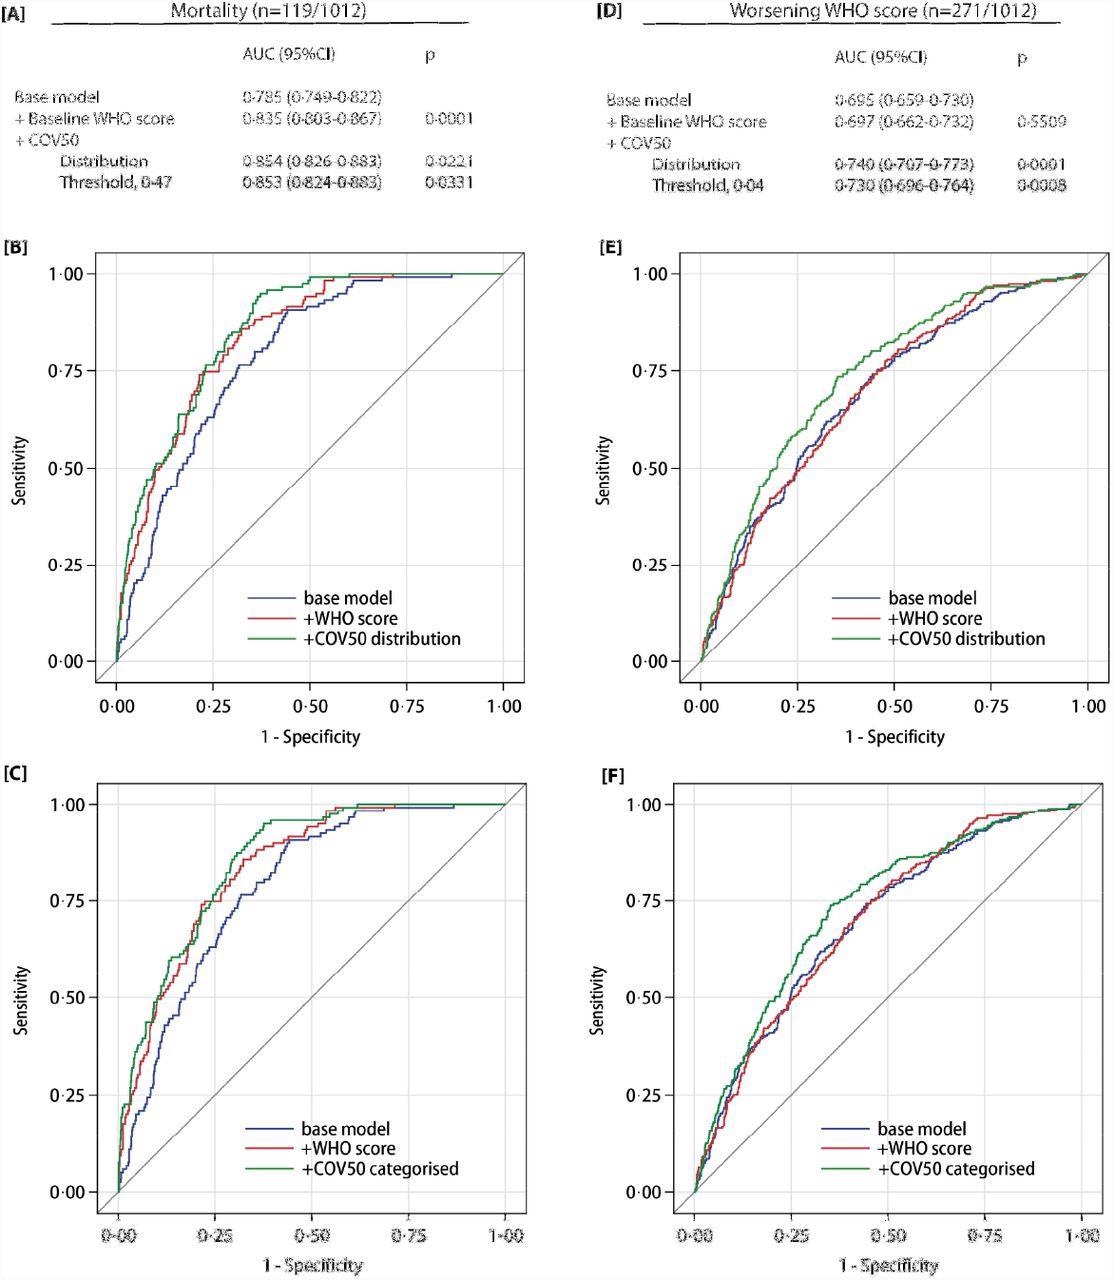 Performance of the COV50 urinary marker on top of other baseline risk factors in the full dataset for contrasting mortality vs survival (panels A-C) and for progression vs non-progression in the baseline WHO score during follow-up (panels D-F). The base model included sex, age, body mass index and the presence of comorbidities: hypertension, heart failure, diabetes or cancer. In subsequent steps, the baseline WHO score was added and next COV50 as a continuously distributed variable (panels B and E) or as a categorized variable based on an optimized threshold of 0·47 for mortality (panel C) or 0·04 for a worsening WHO score (panel F).